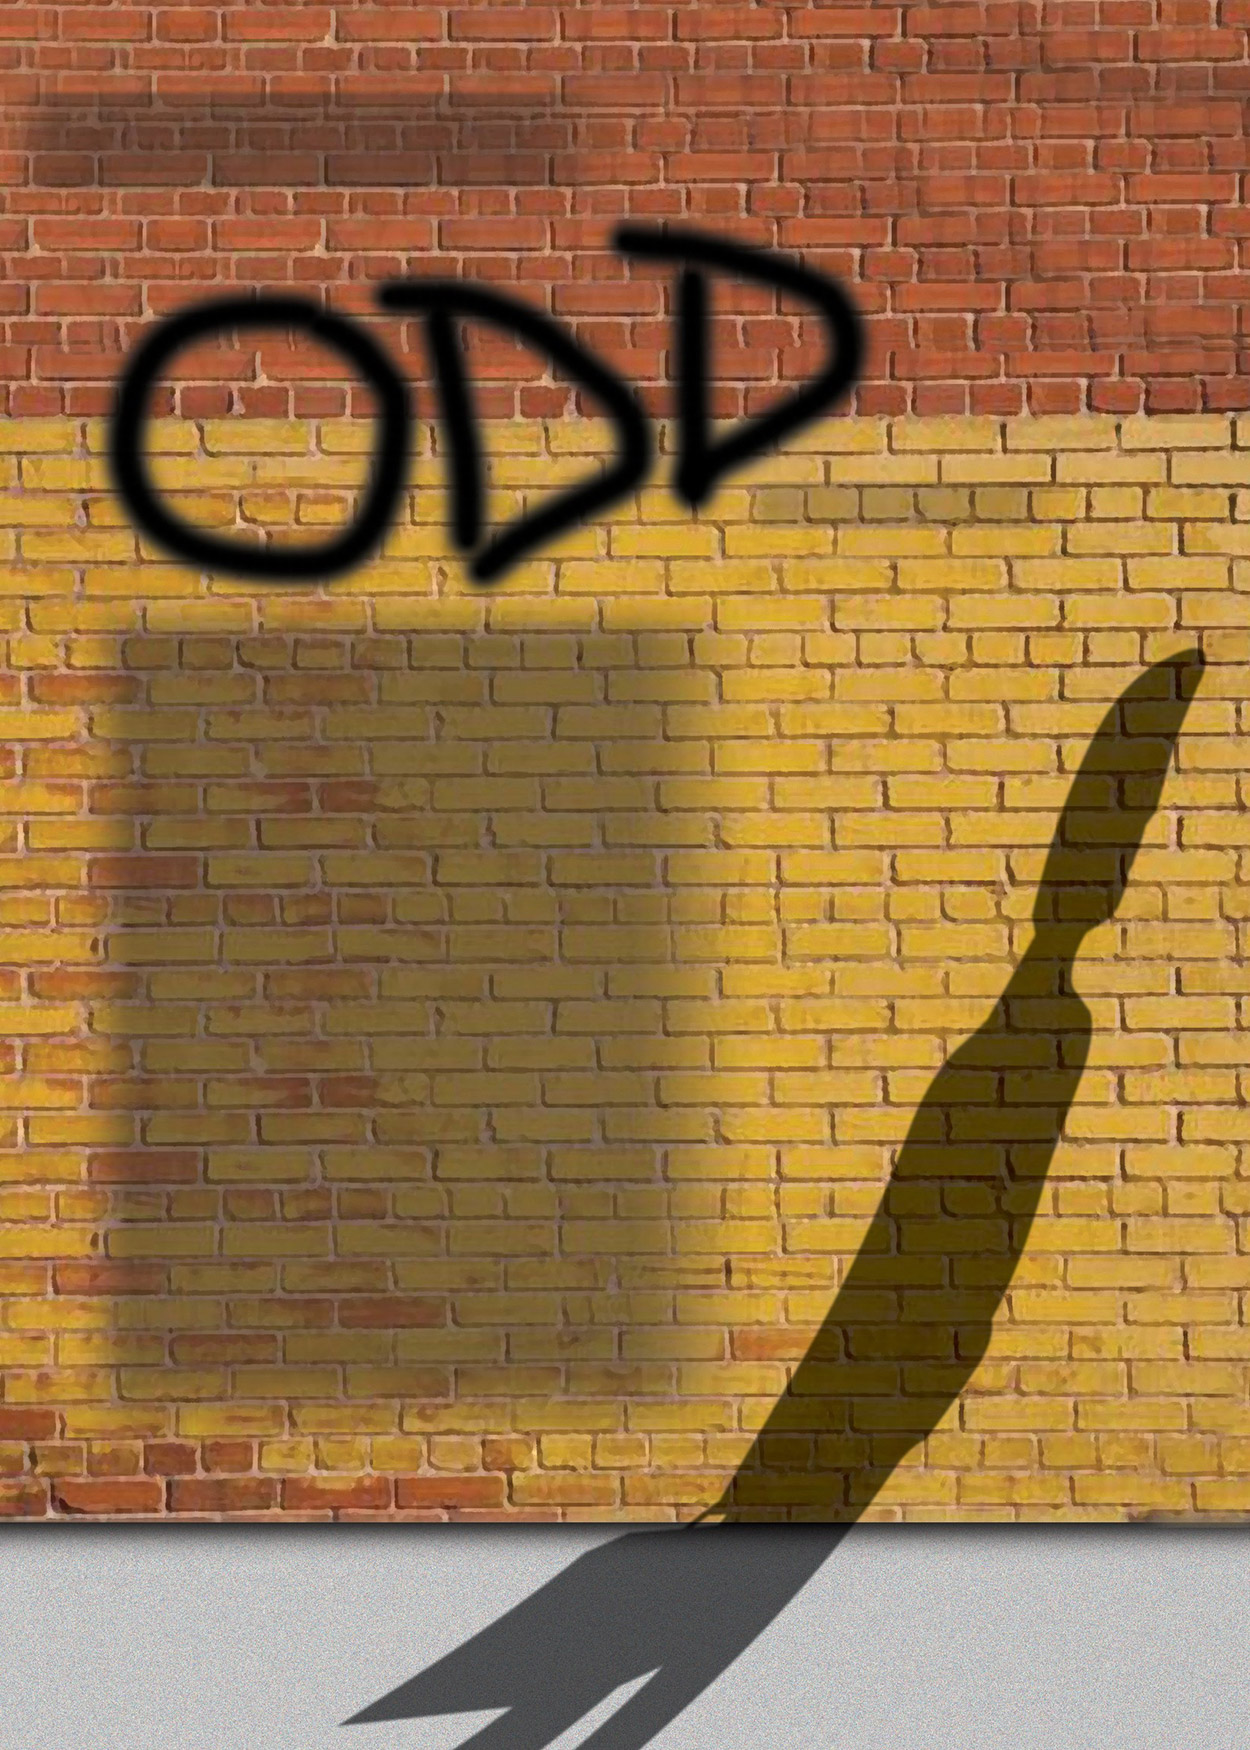 Artwork of shadow against a yellow brick wall and title "ODD"